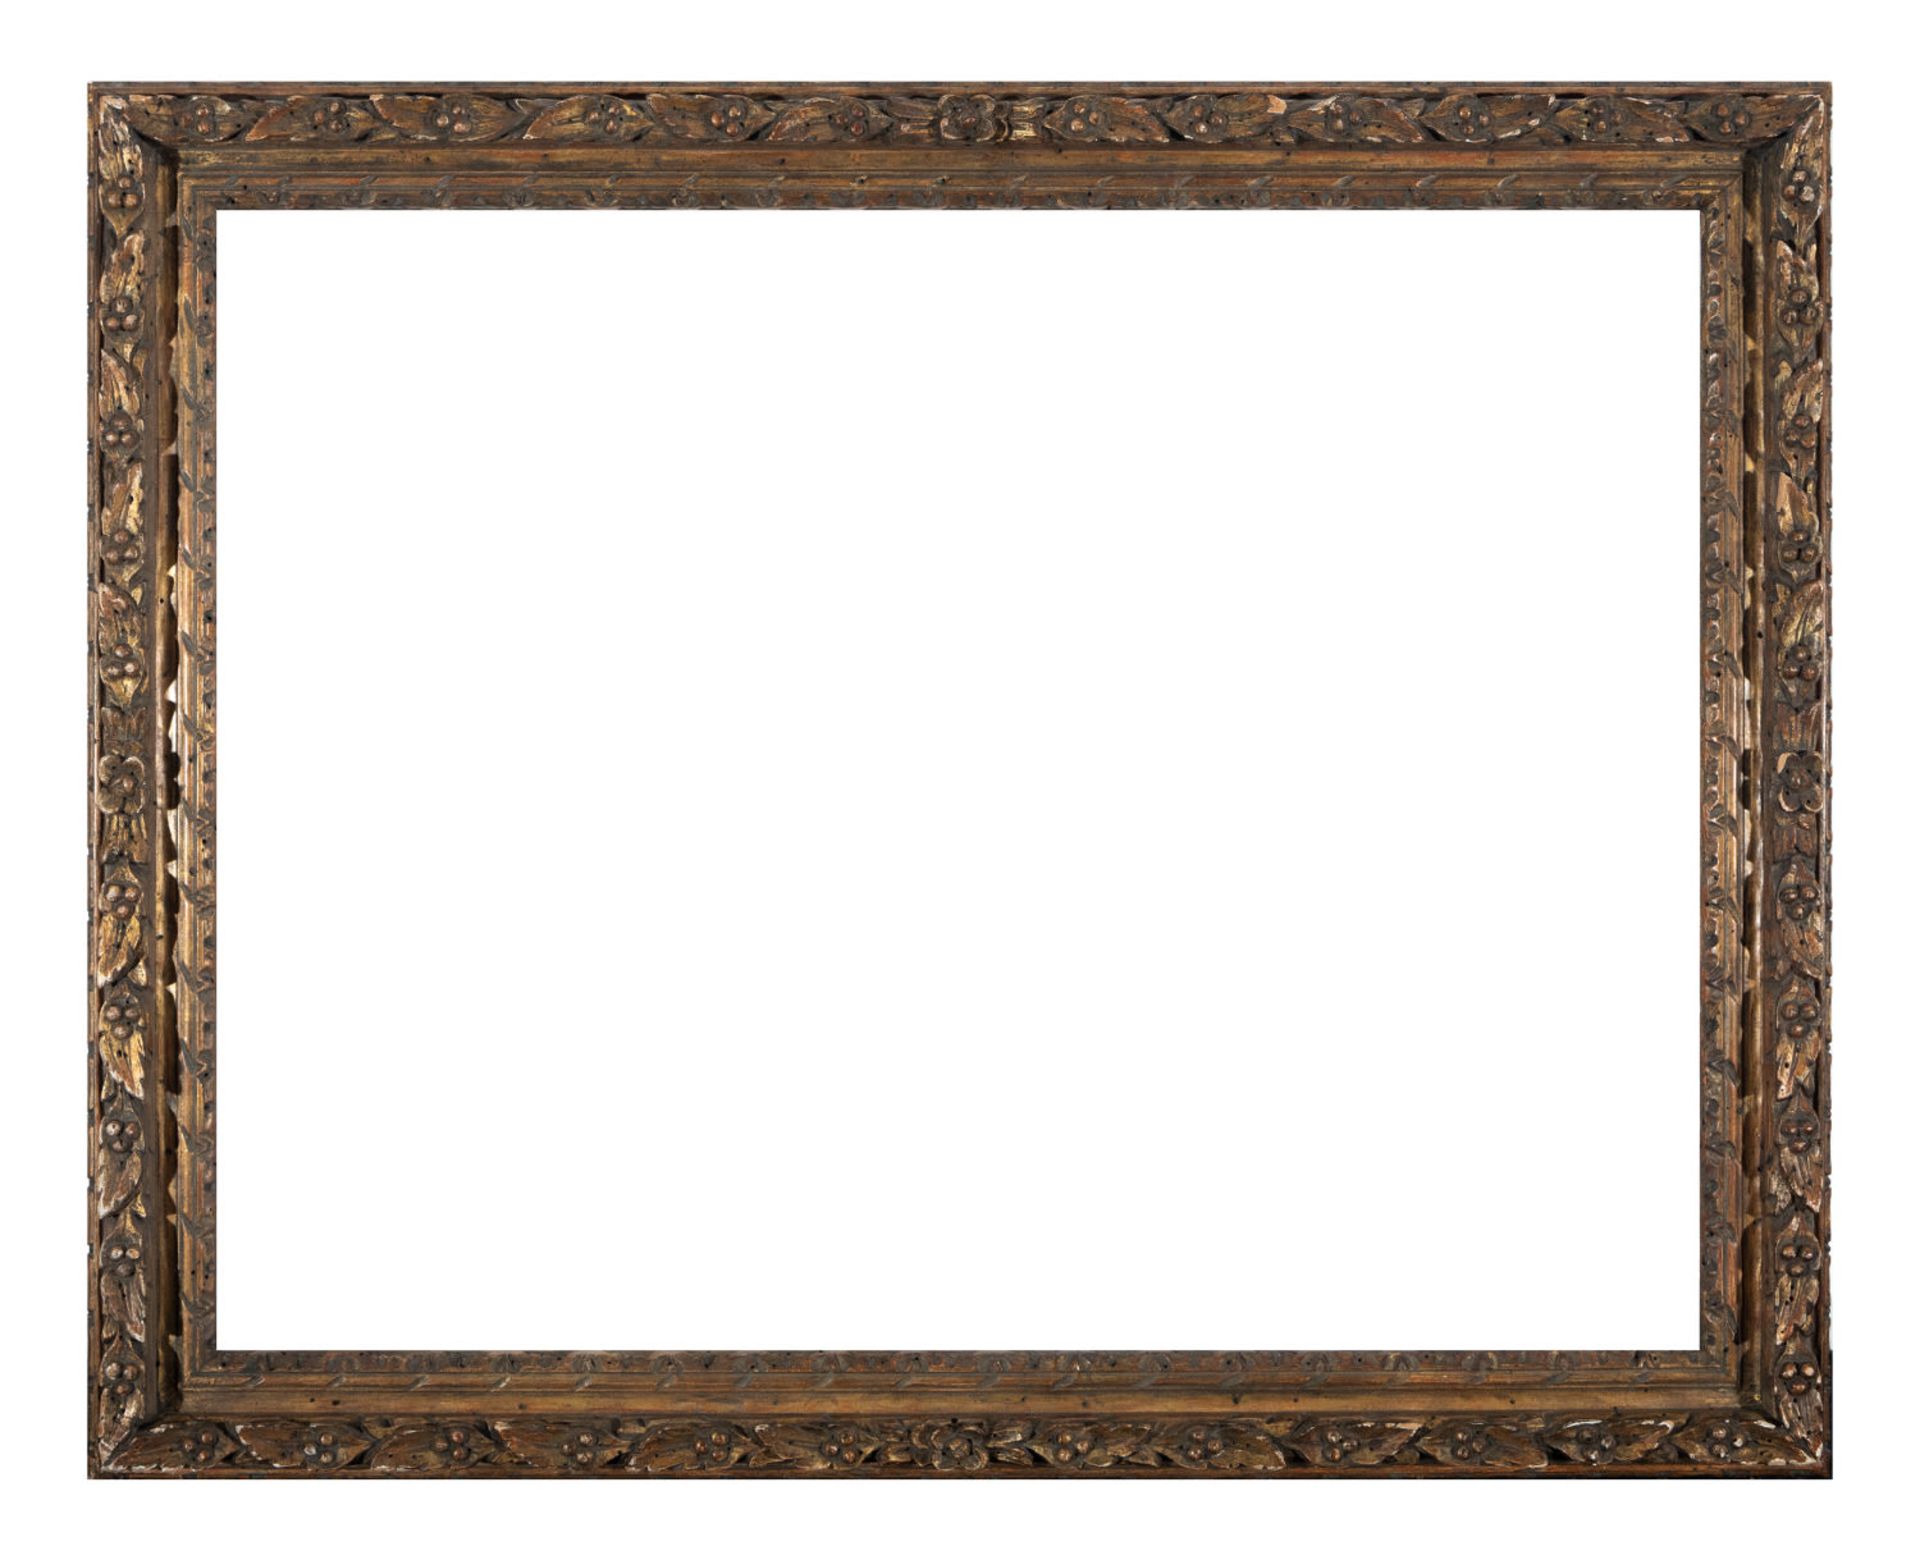 Frame in Carved and Gilded Border with Vine Leaf Motifs, 19th century